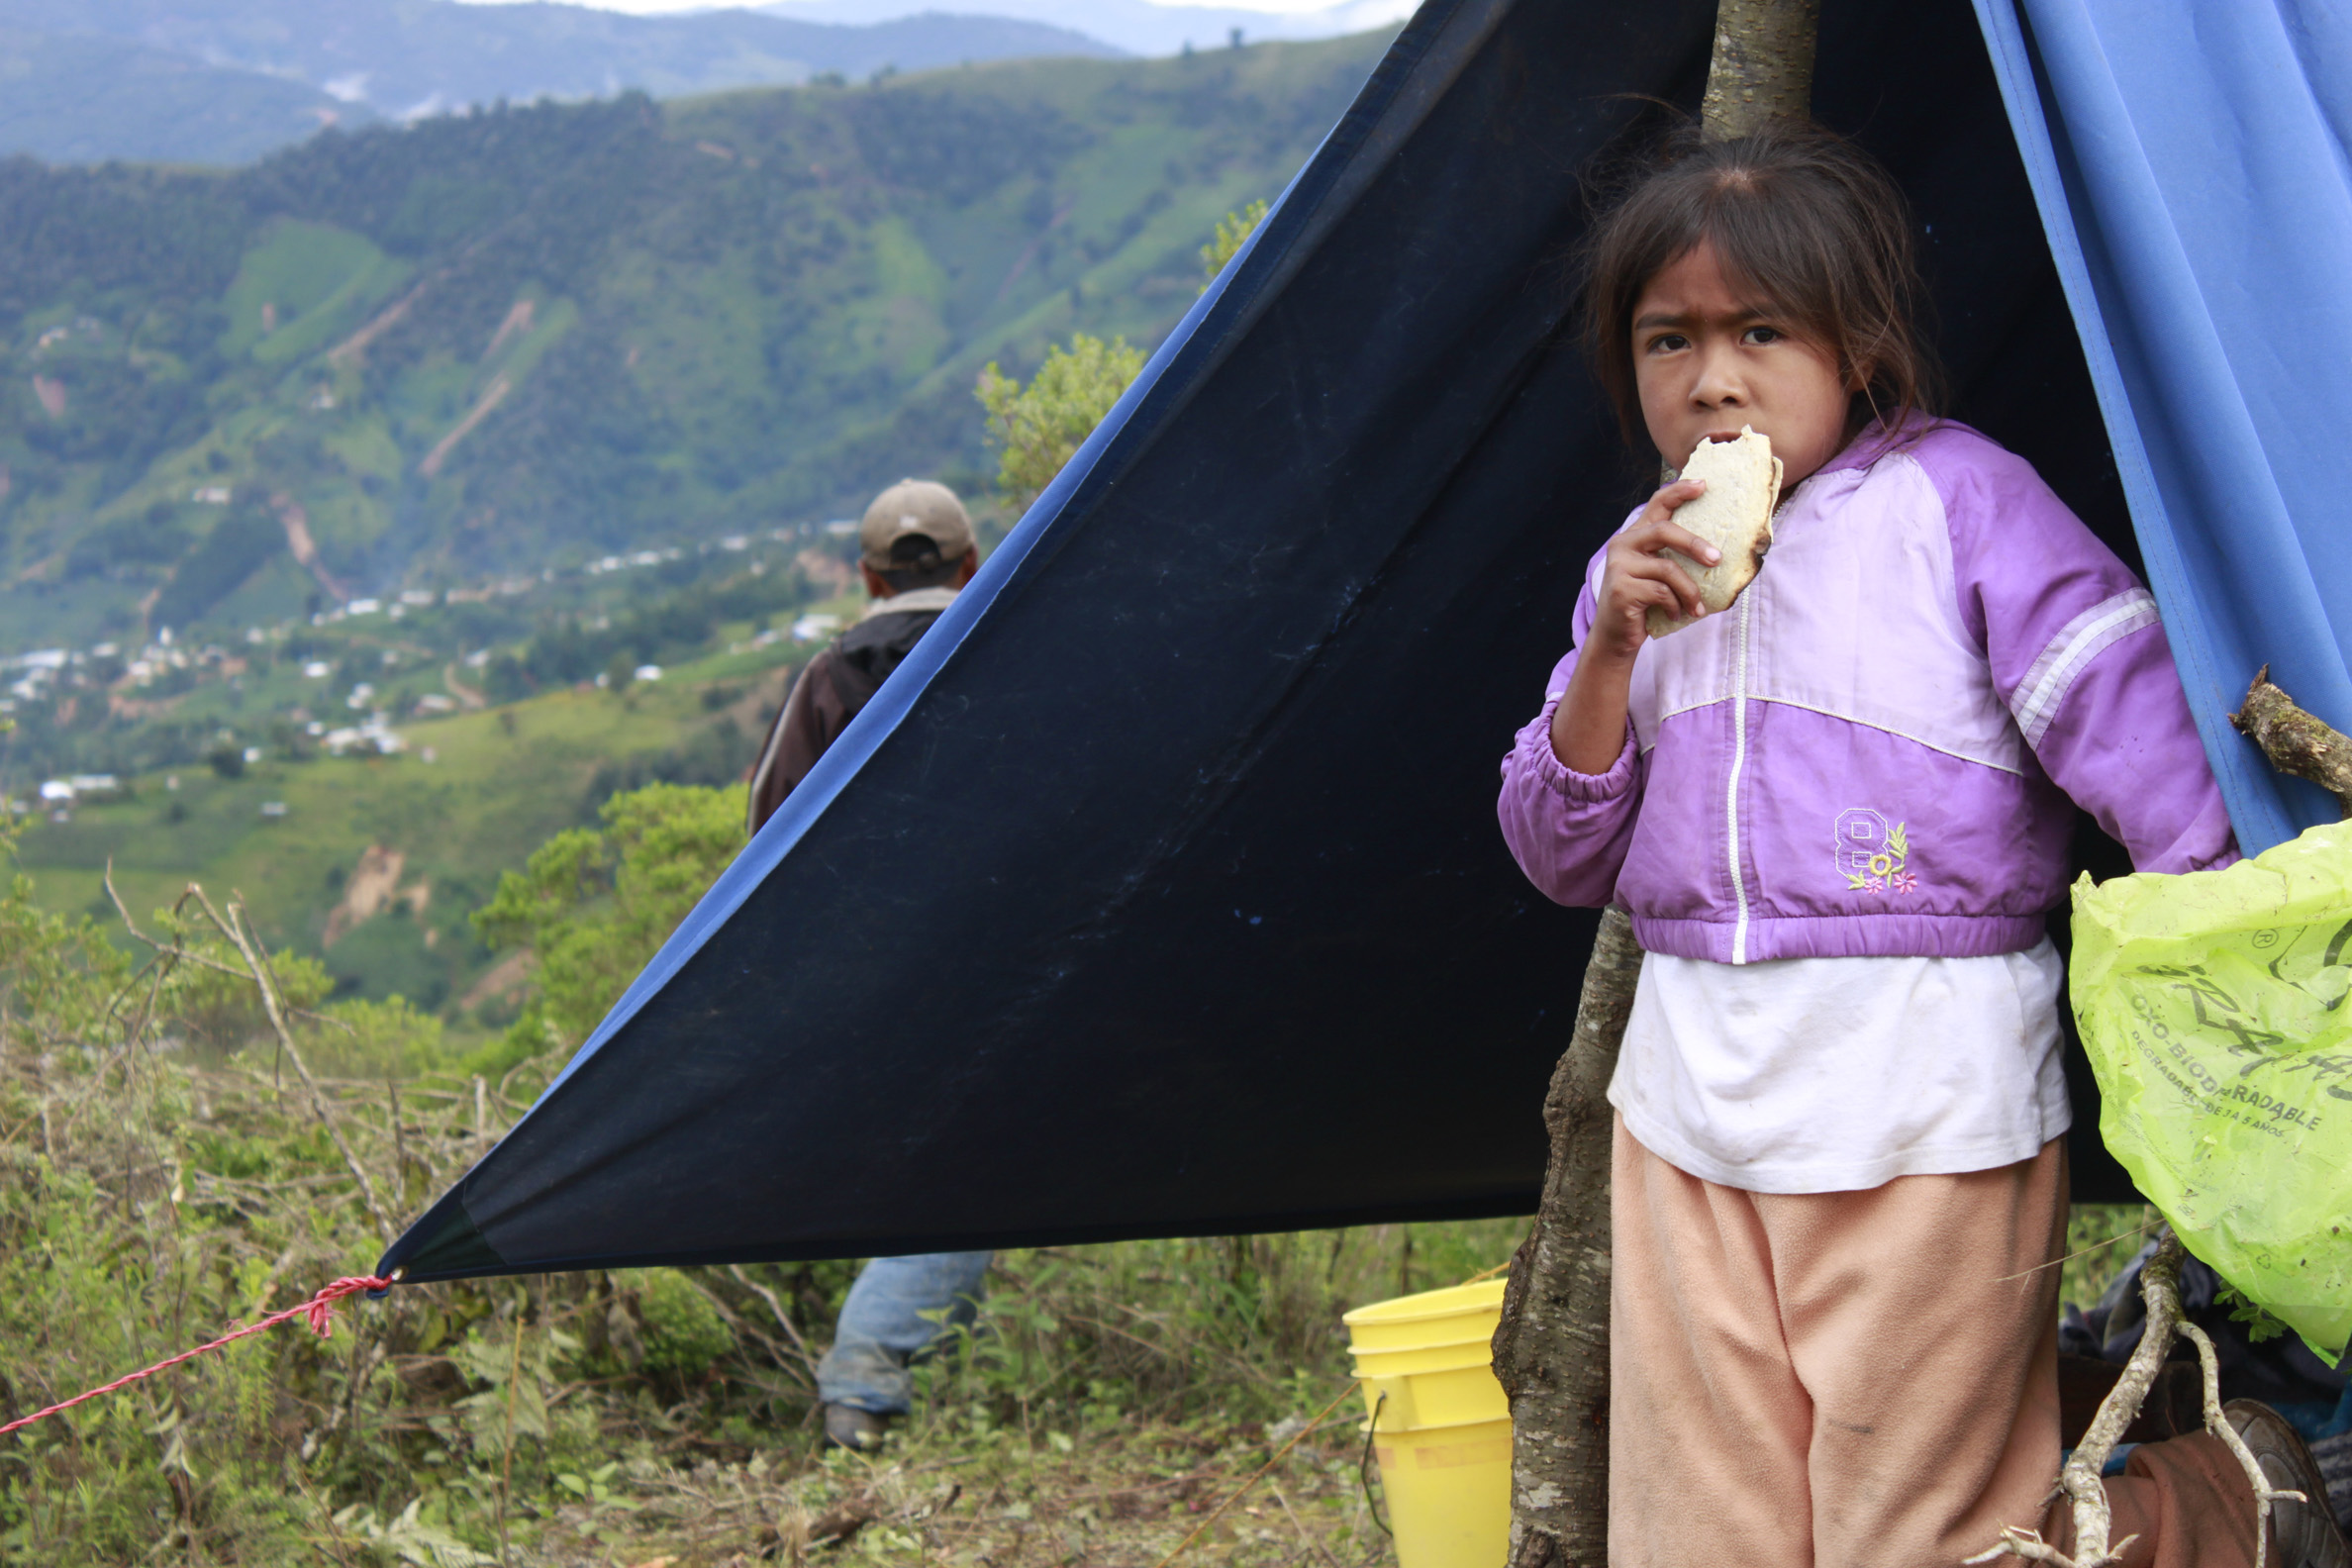 Camp of indigenous people displaced by storms. Photo from The Tlachinollan Human Rights Center used with permission.